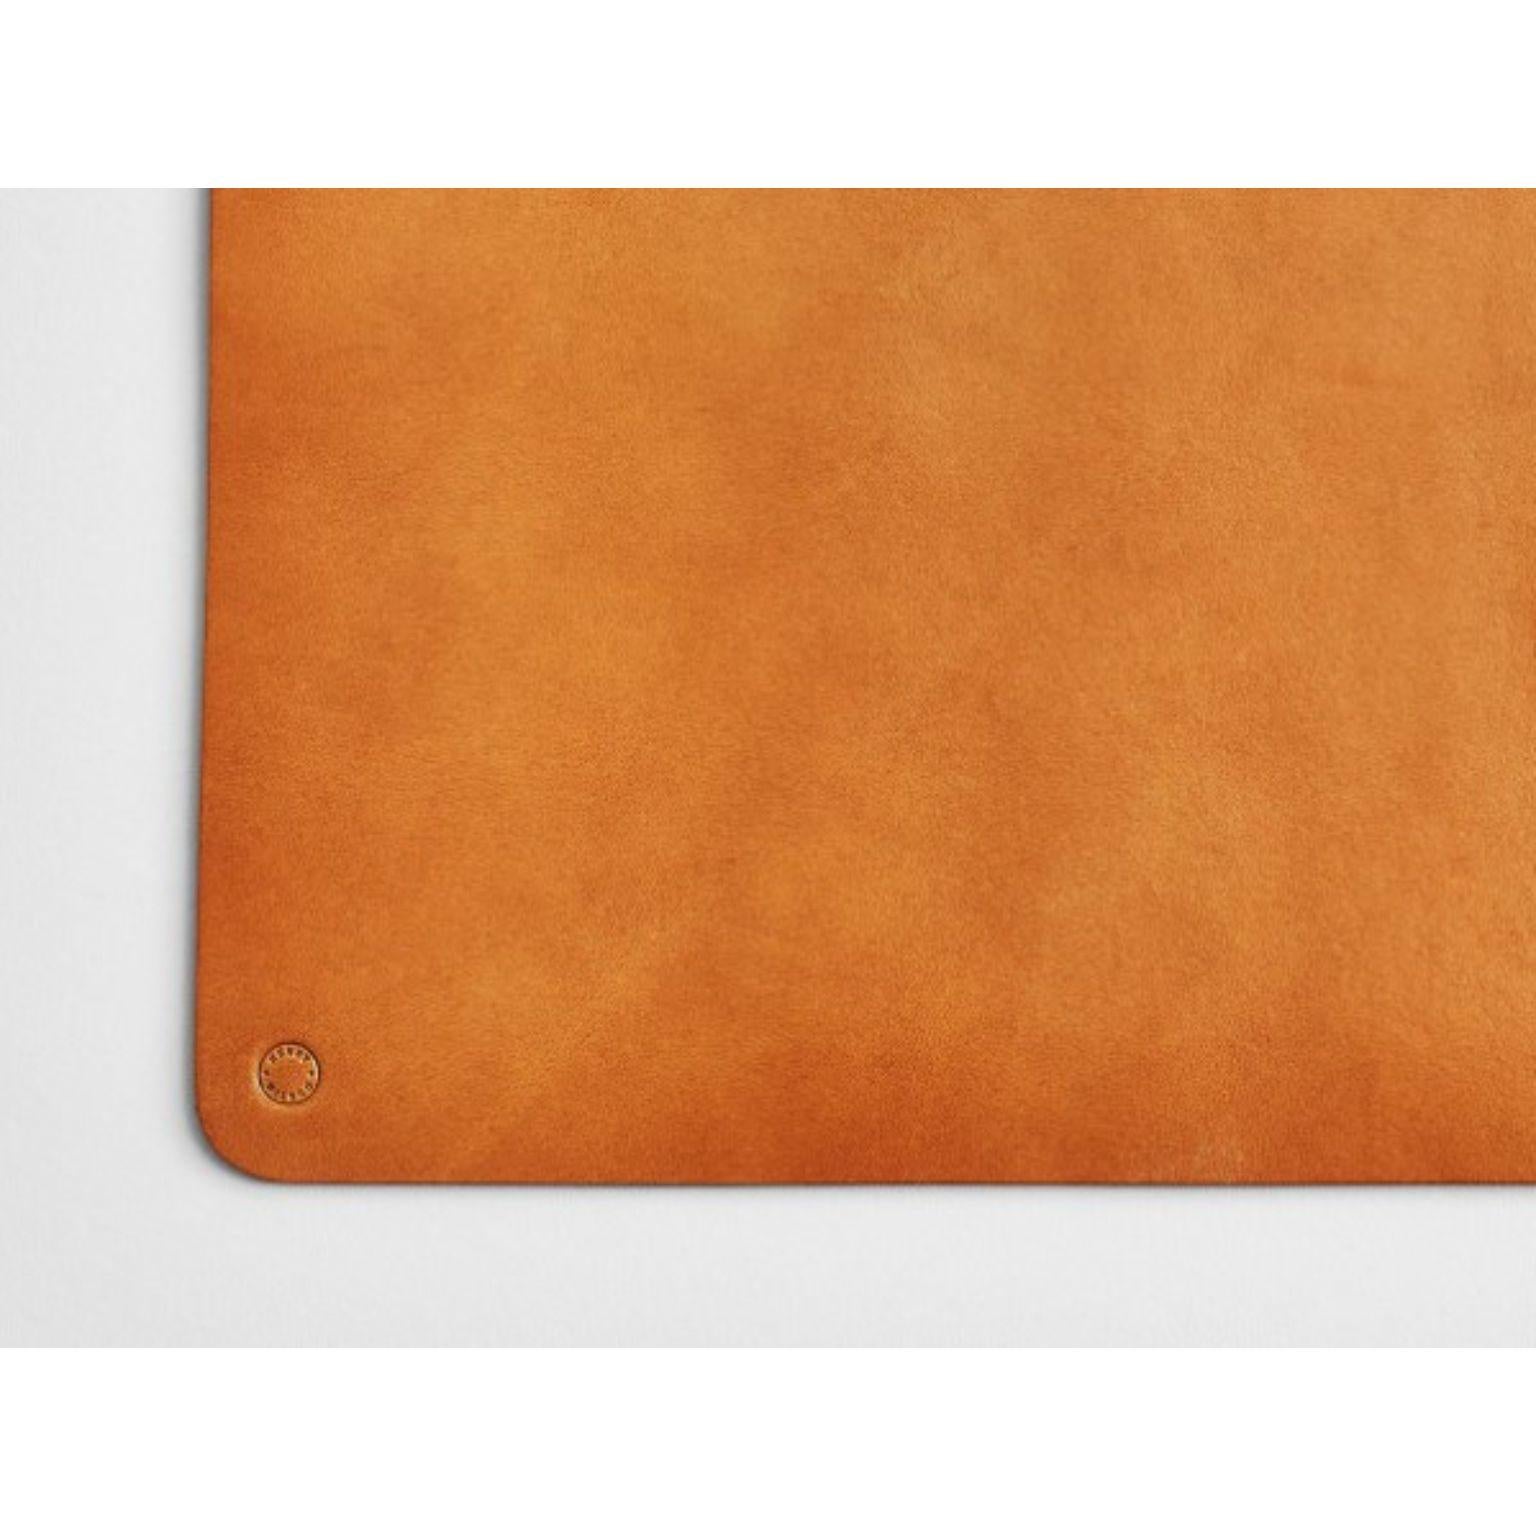 Small Tan Leather Desk Mat by Henry Wilson
Dimensions: W 32 x D 22 x H 0.4 cm
Materials: Leather

Our leather desk mats are made of vegetable tanned saddle leather imported from Italy. This type of leather is thick and durable, and its